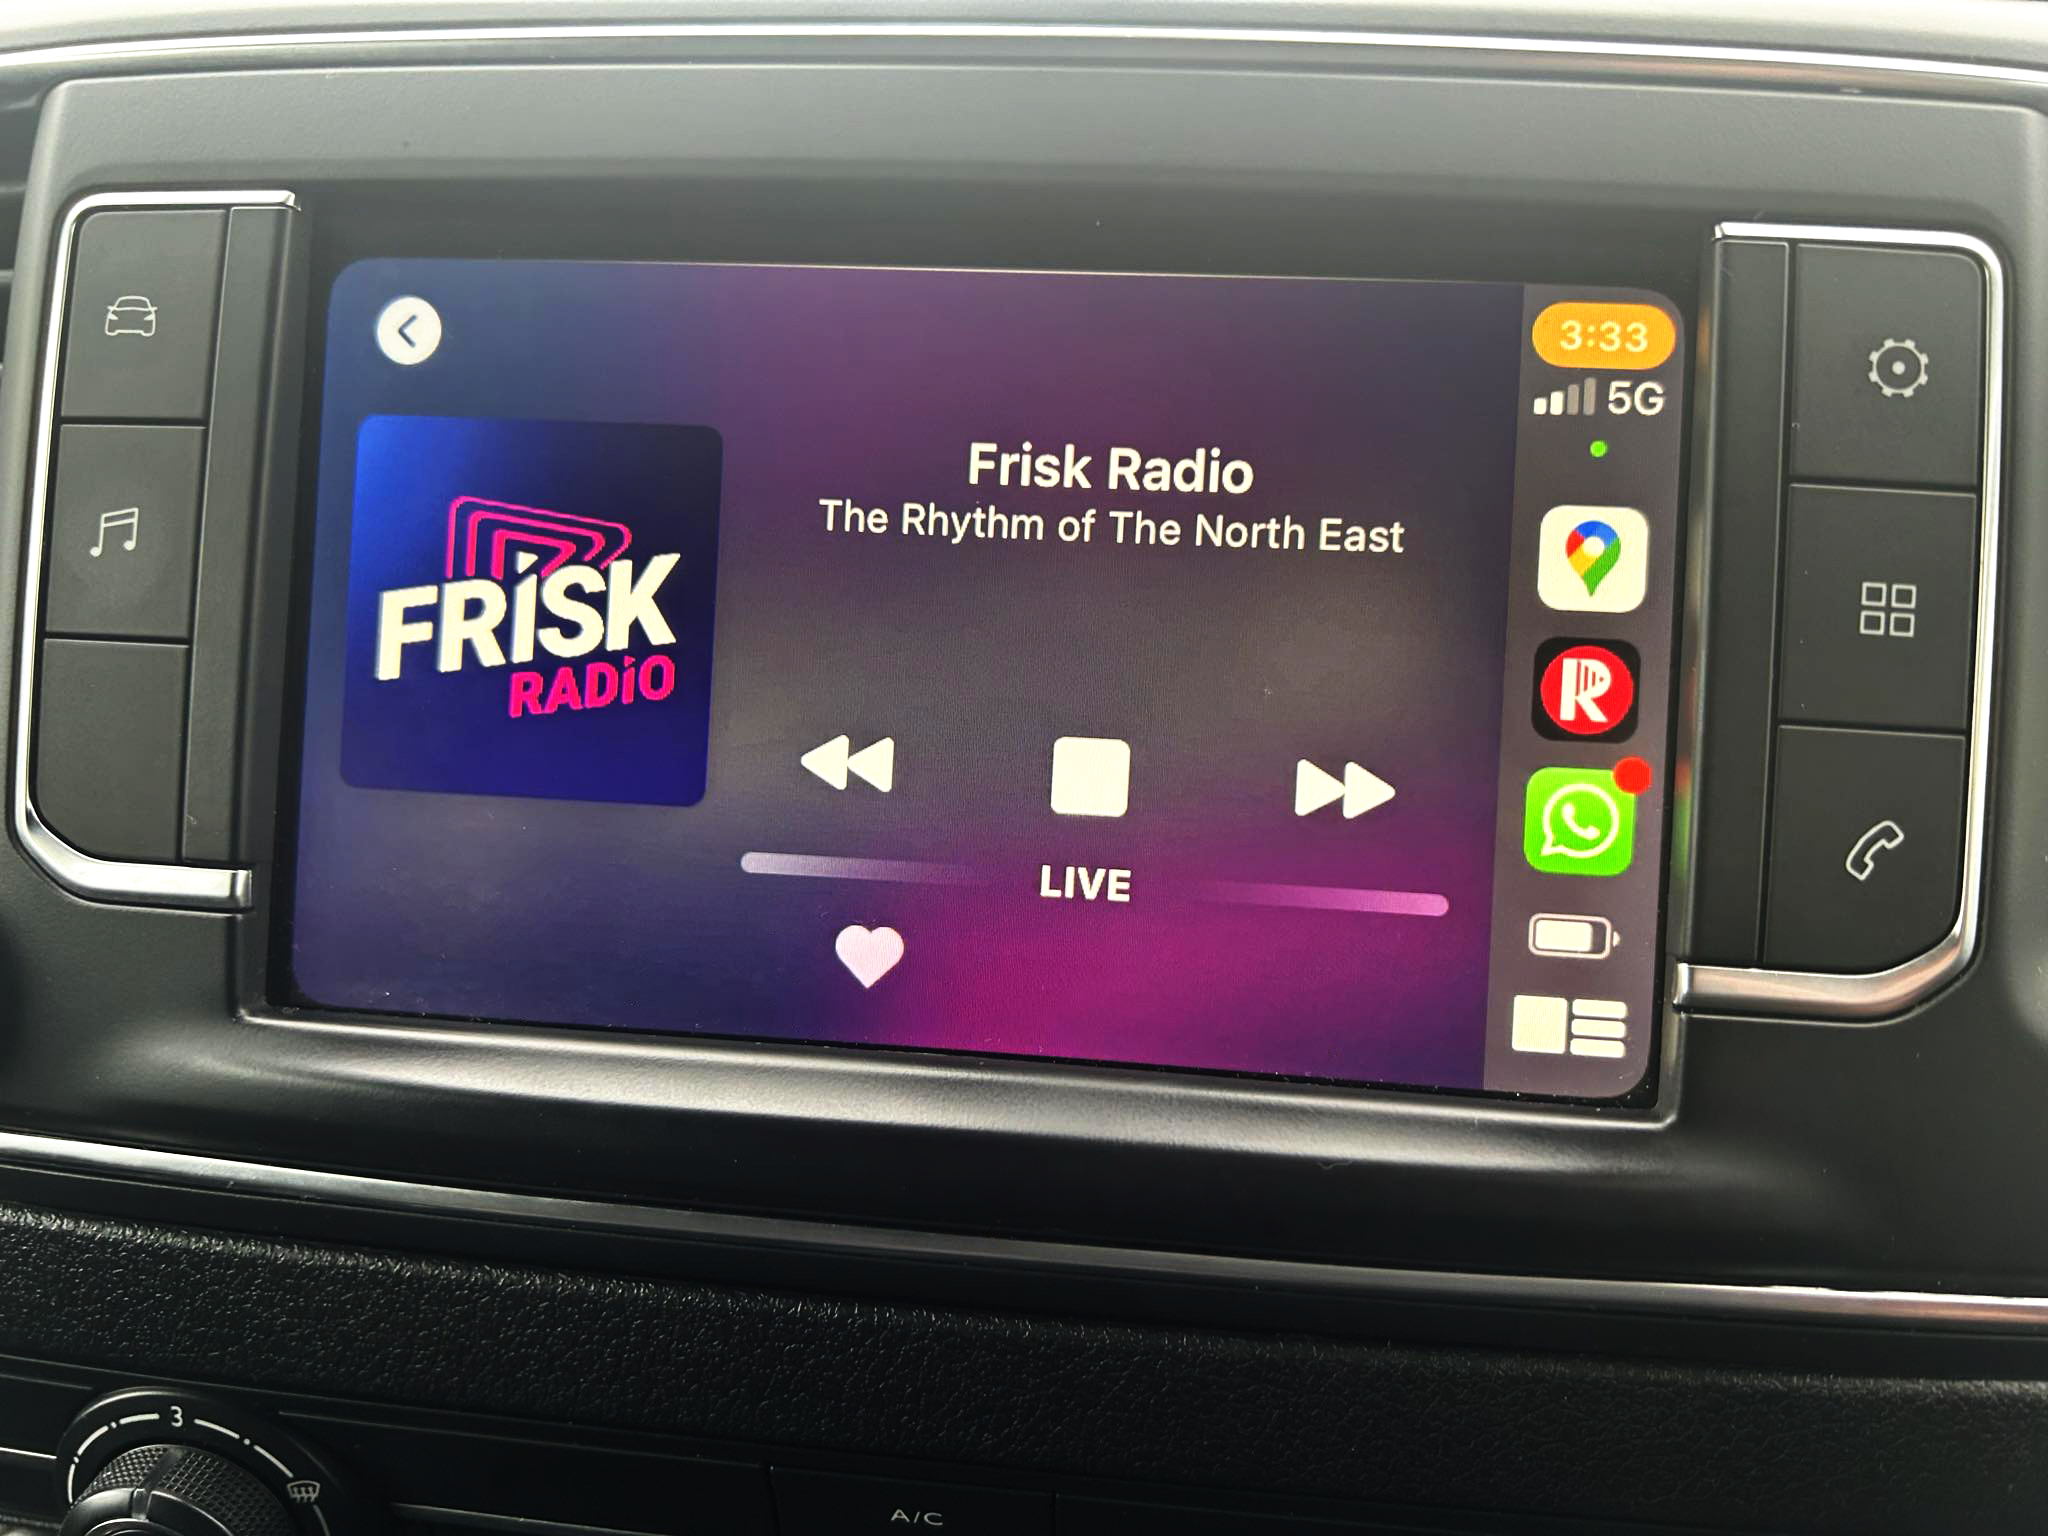 How do I listen to Frisk Radio on DAB? at Frisk Radio - The Rhythm of The North East